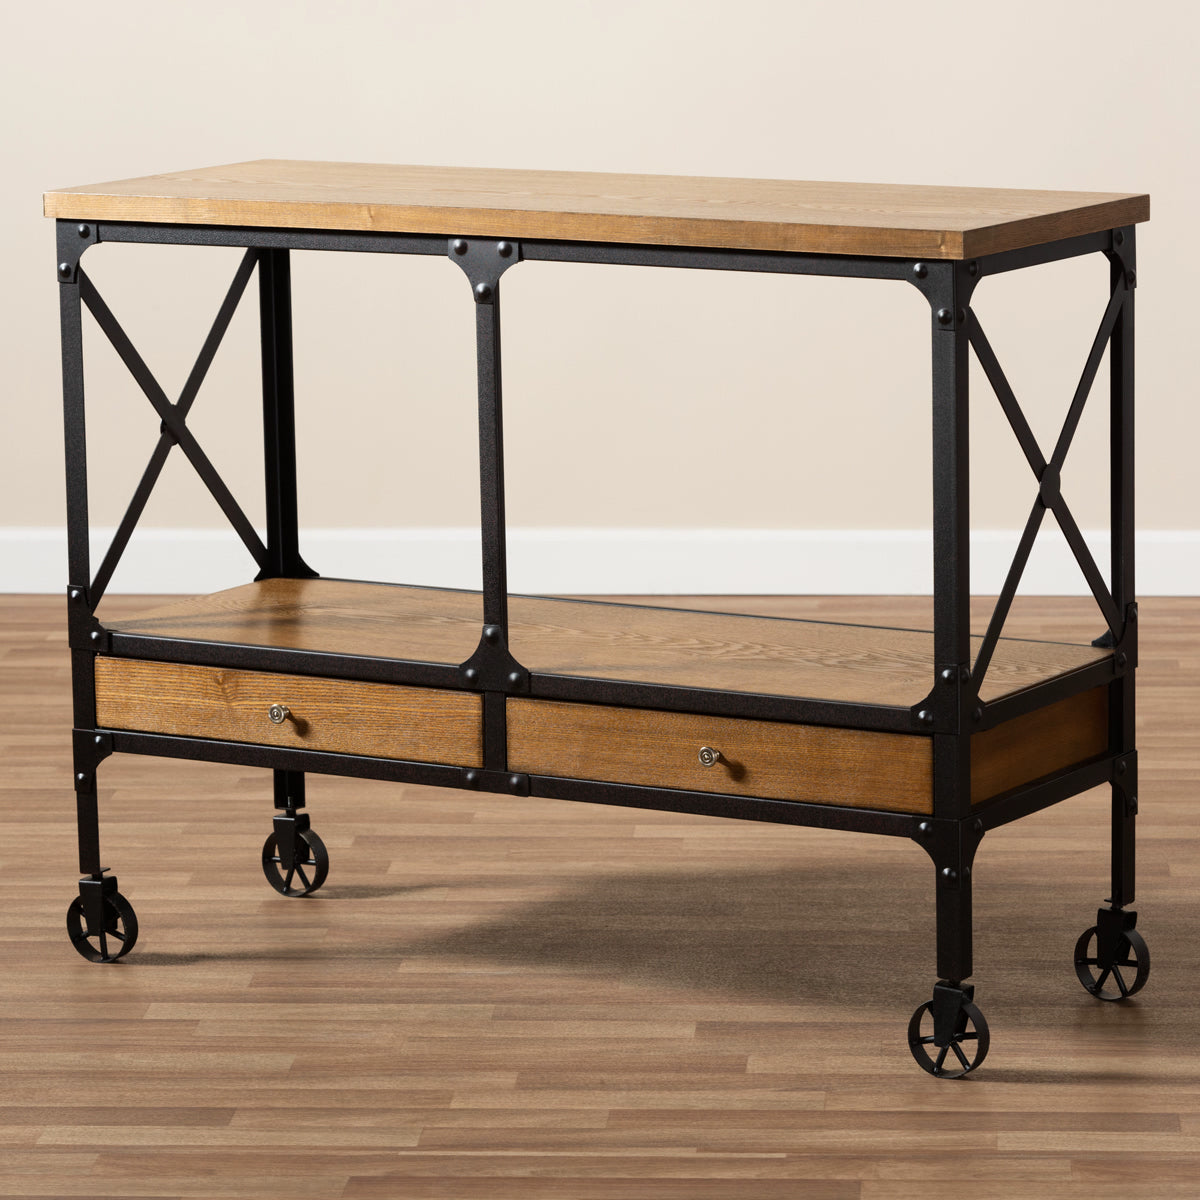 Baxton Studio Alves Vintage Rustic Industrial Style Wood and Dark Bronze Finished Metal Wheeled Console Table with Drawers Baxton Studio-0-Minimal And Modern - 8